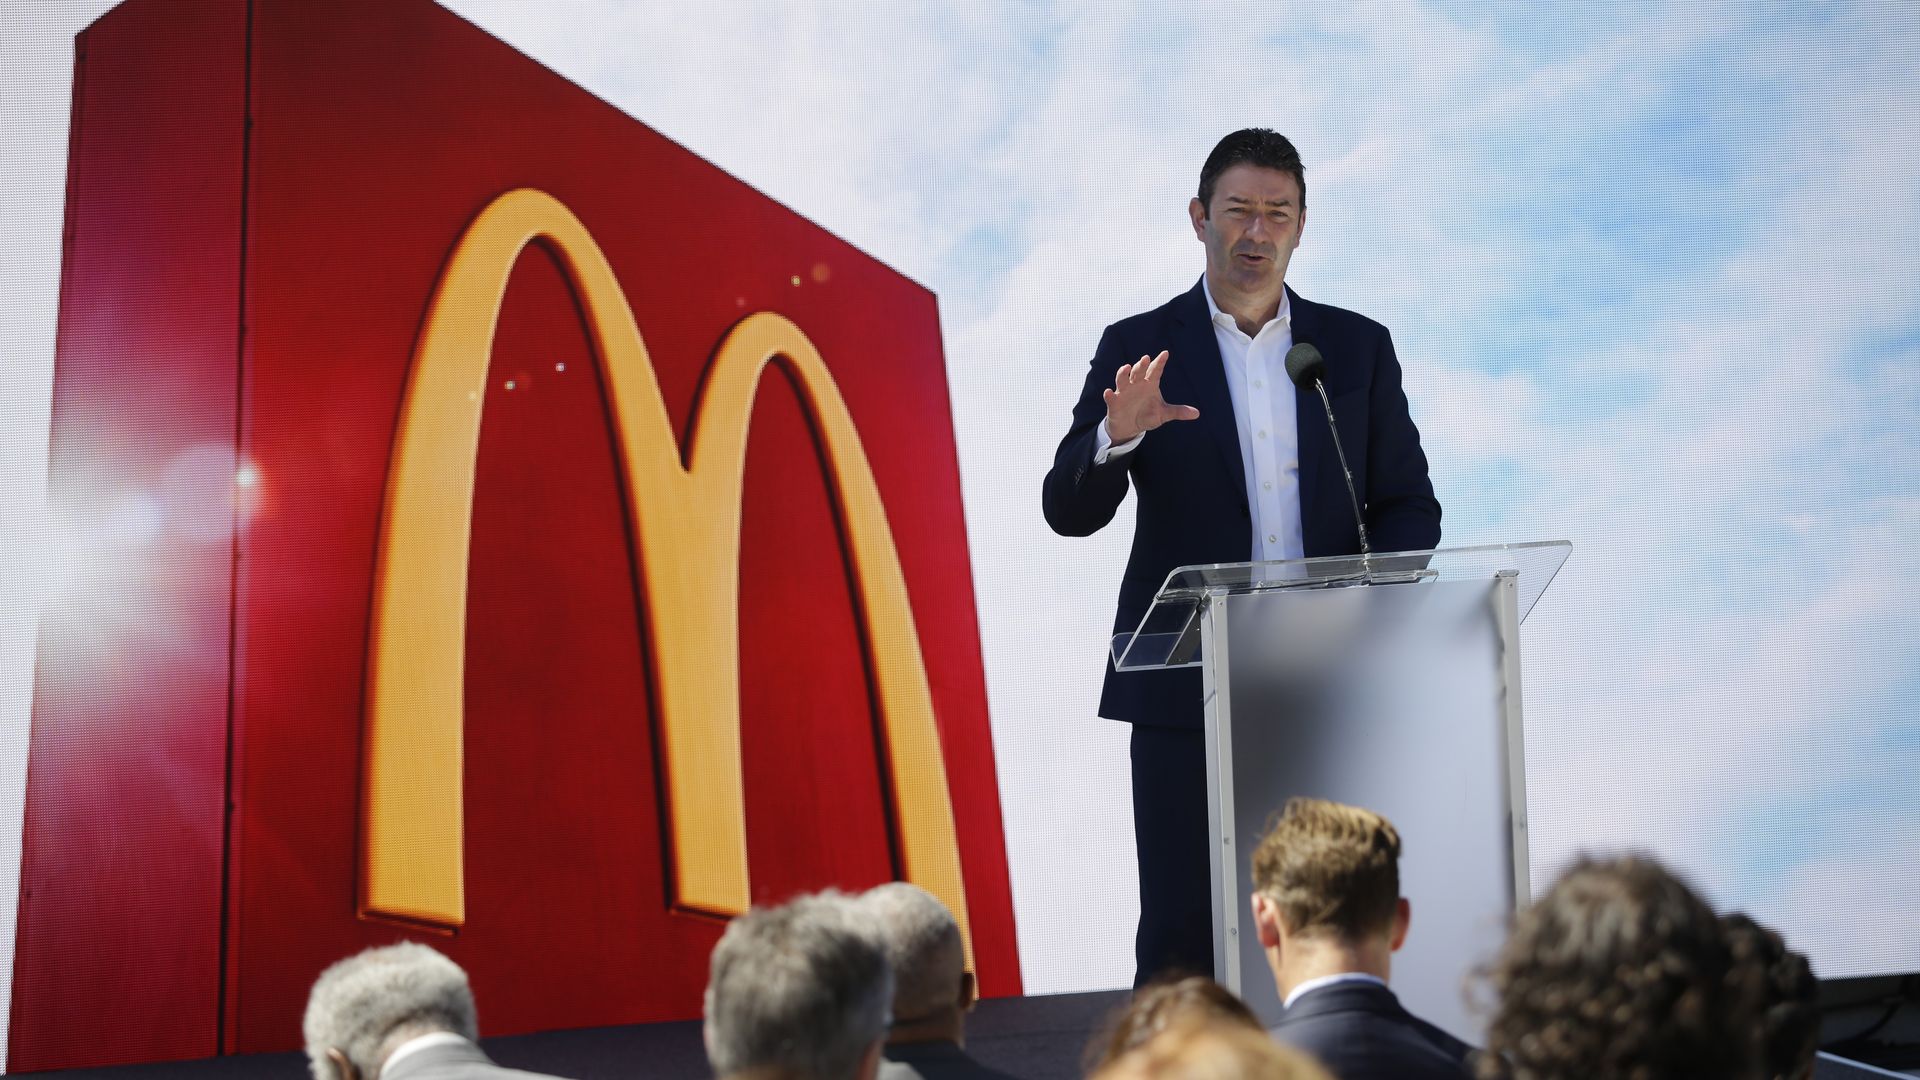  Steve Easterbrook, chief executive officer of McDonald's Corp., speaks during the opening of the company's new headquarters in Chicago, Illinois, U.S., on Monday, June 4, 2018.